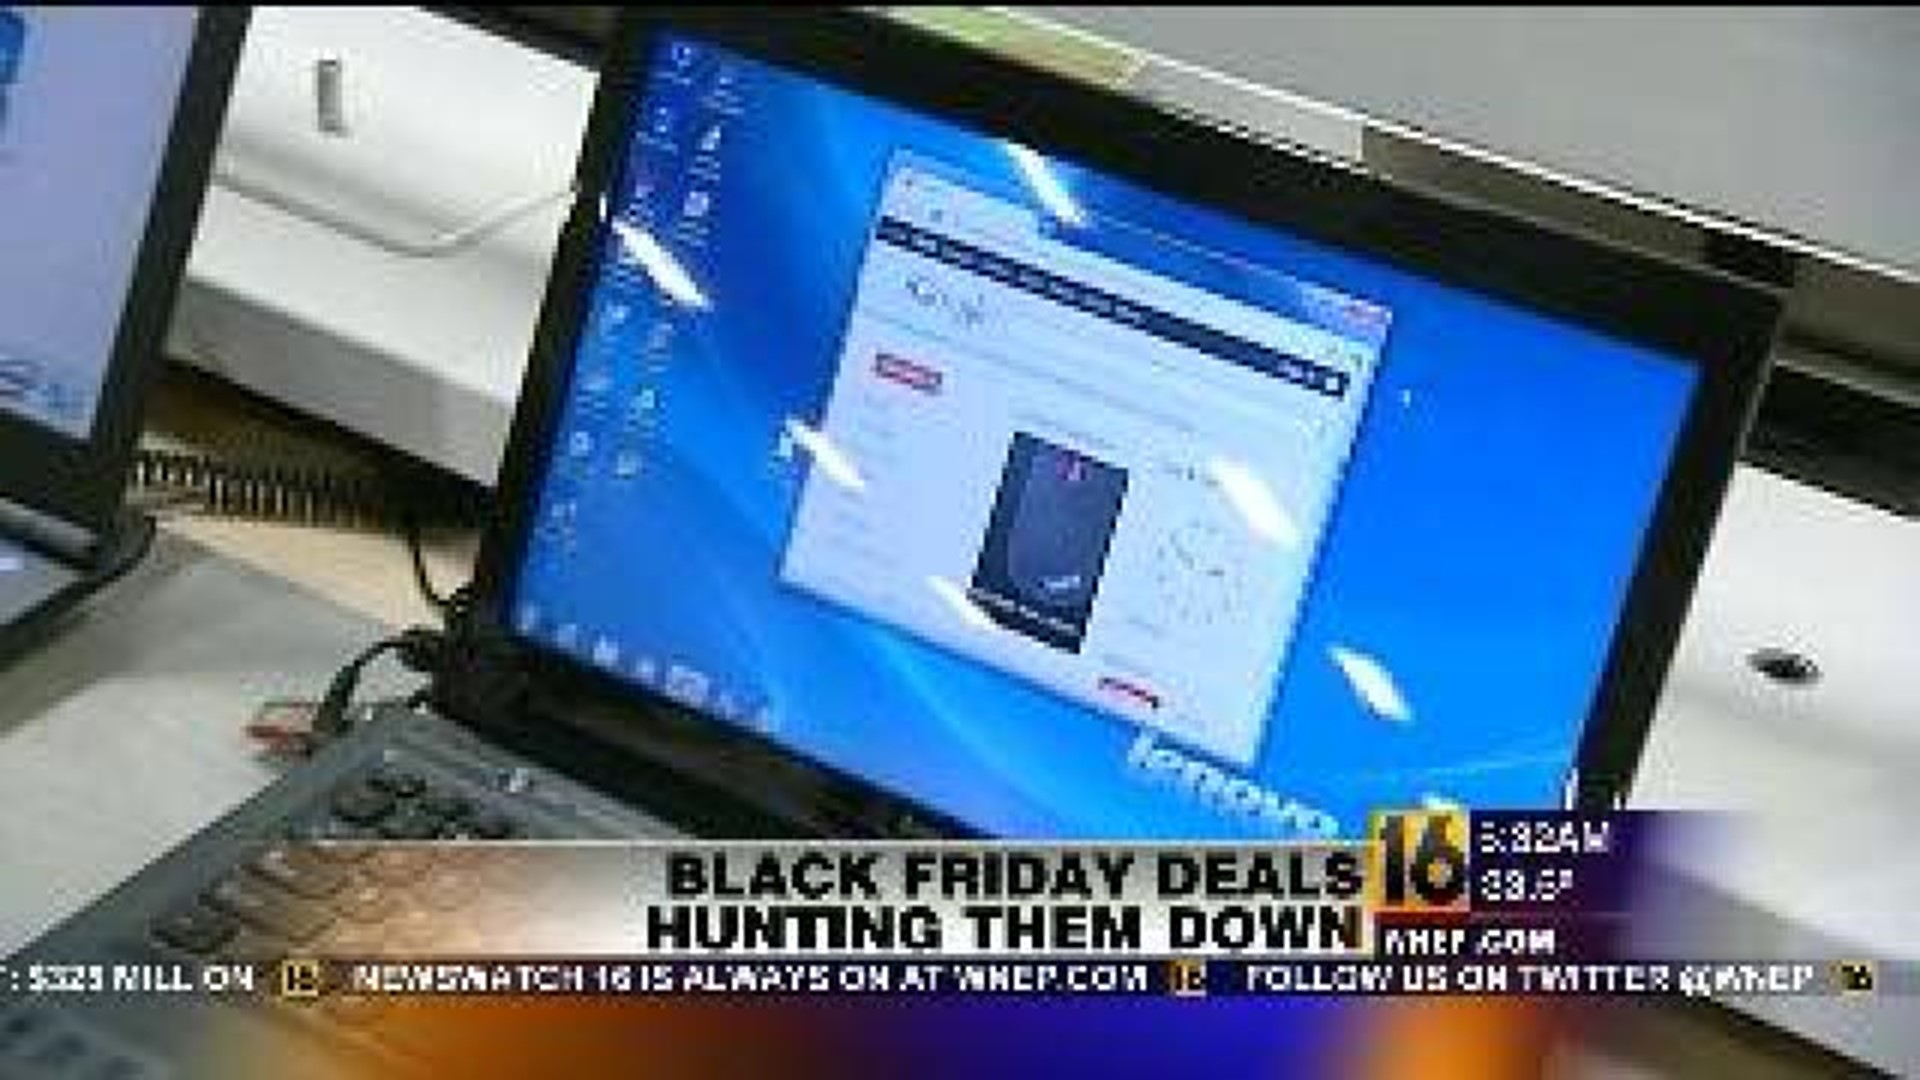 Black Friday Tips: What Not To Buy